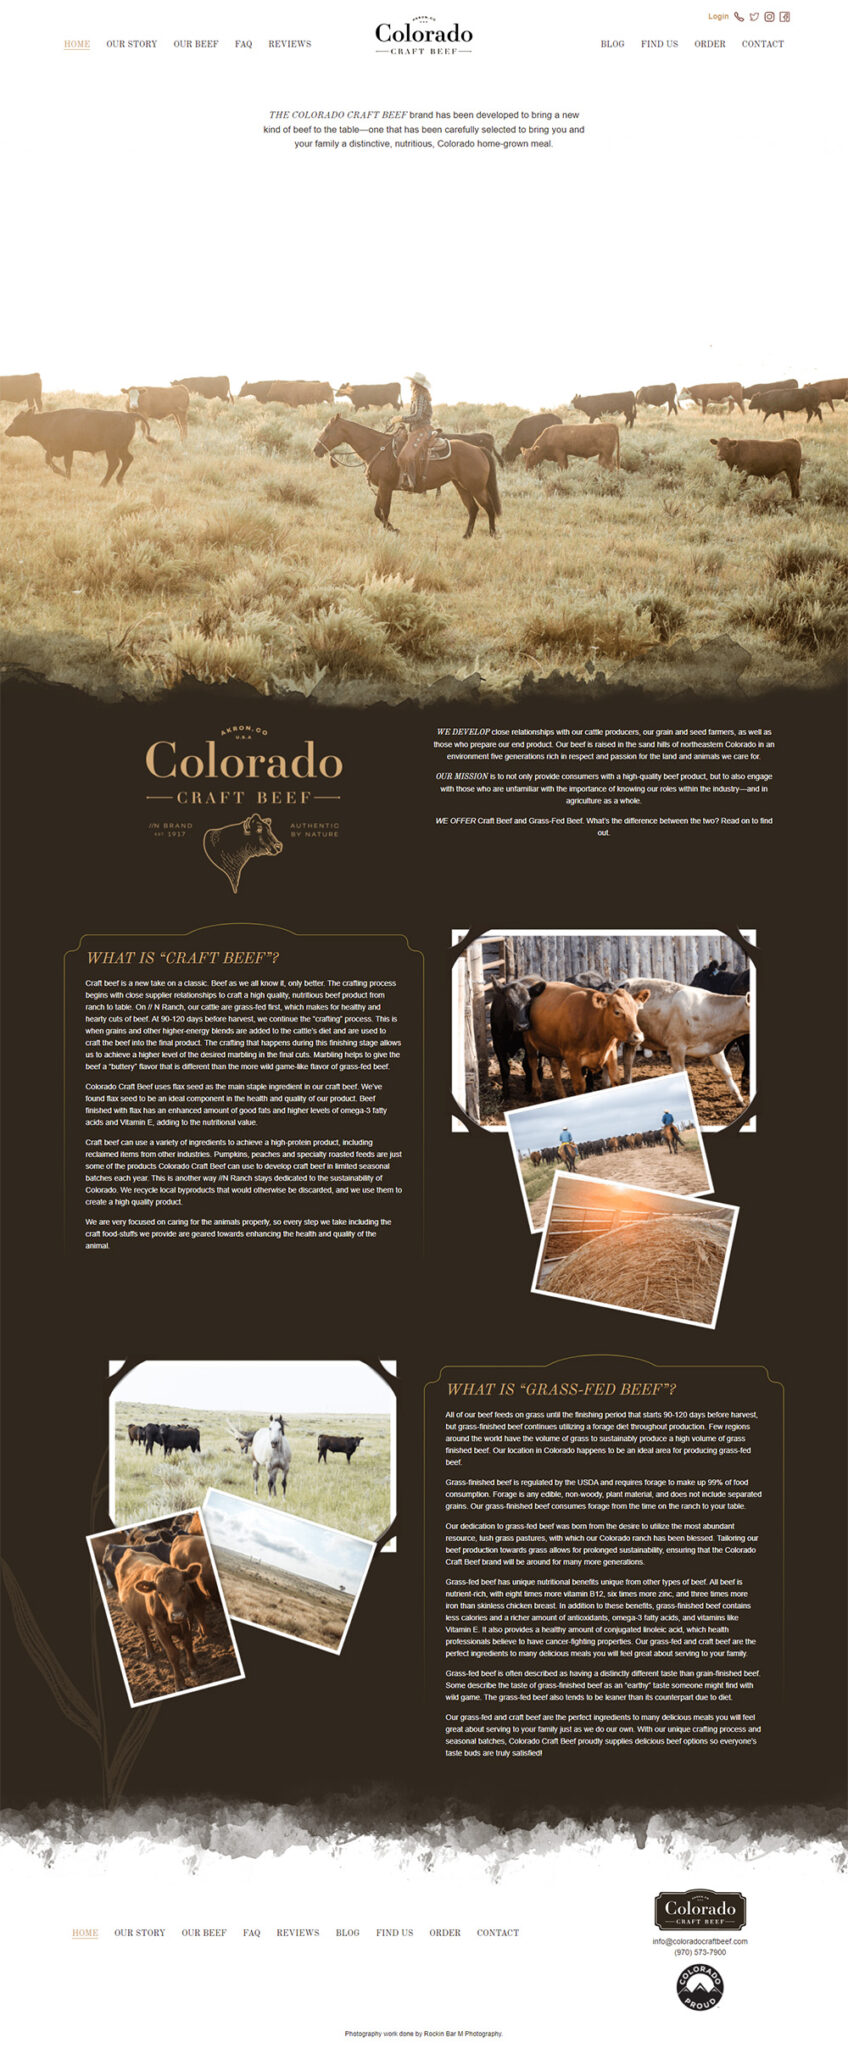 Colorado Craft Beef Home page before redesign